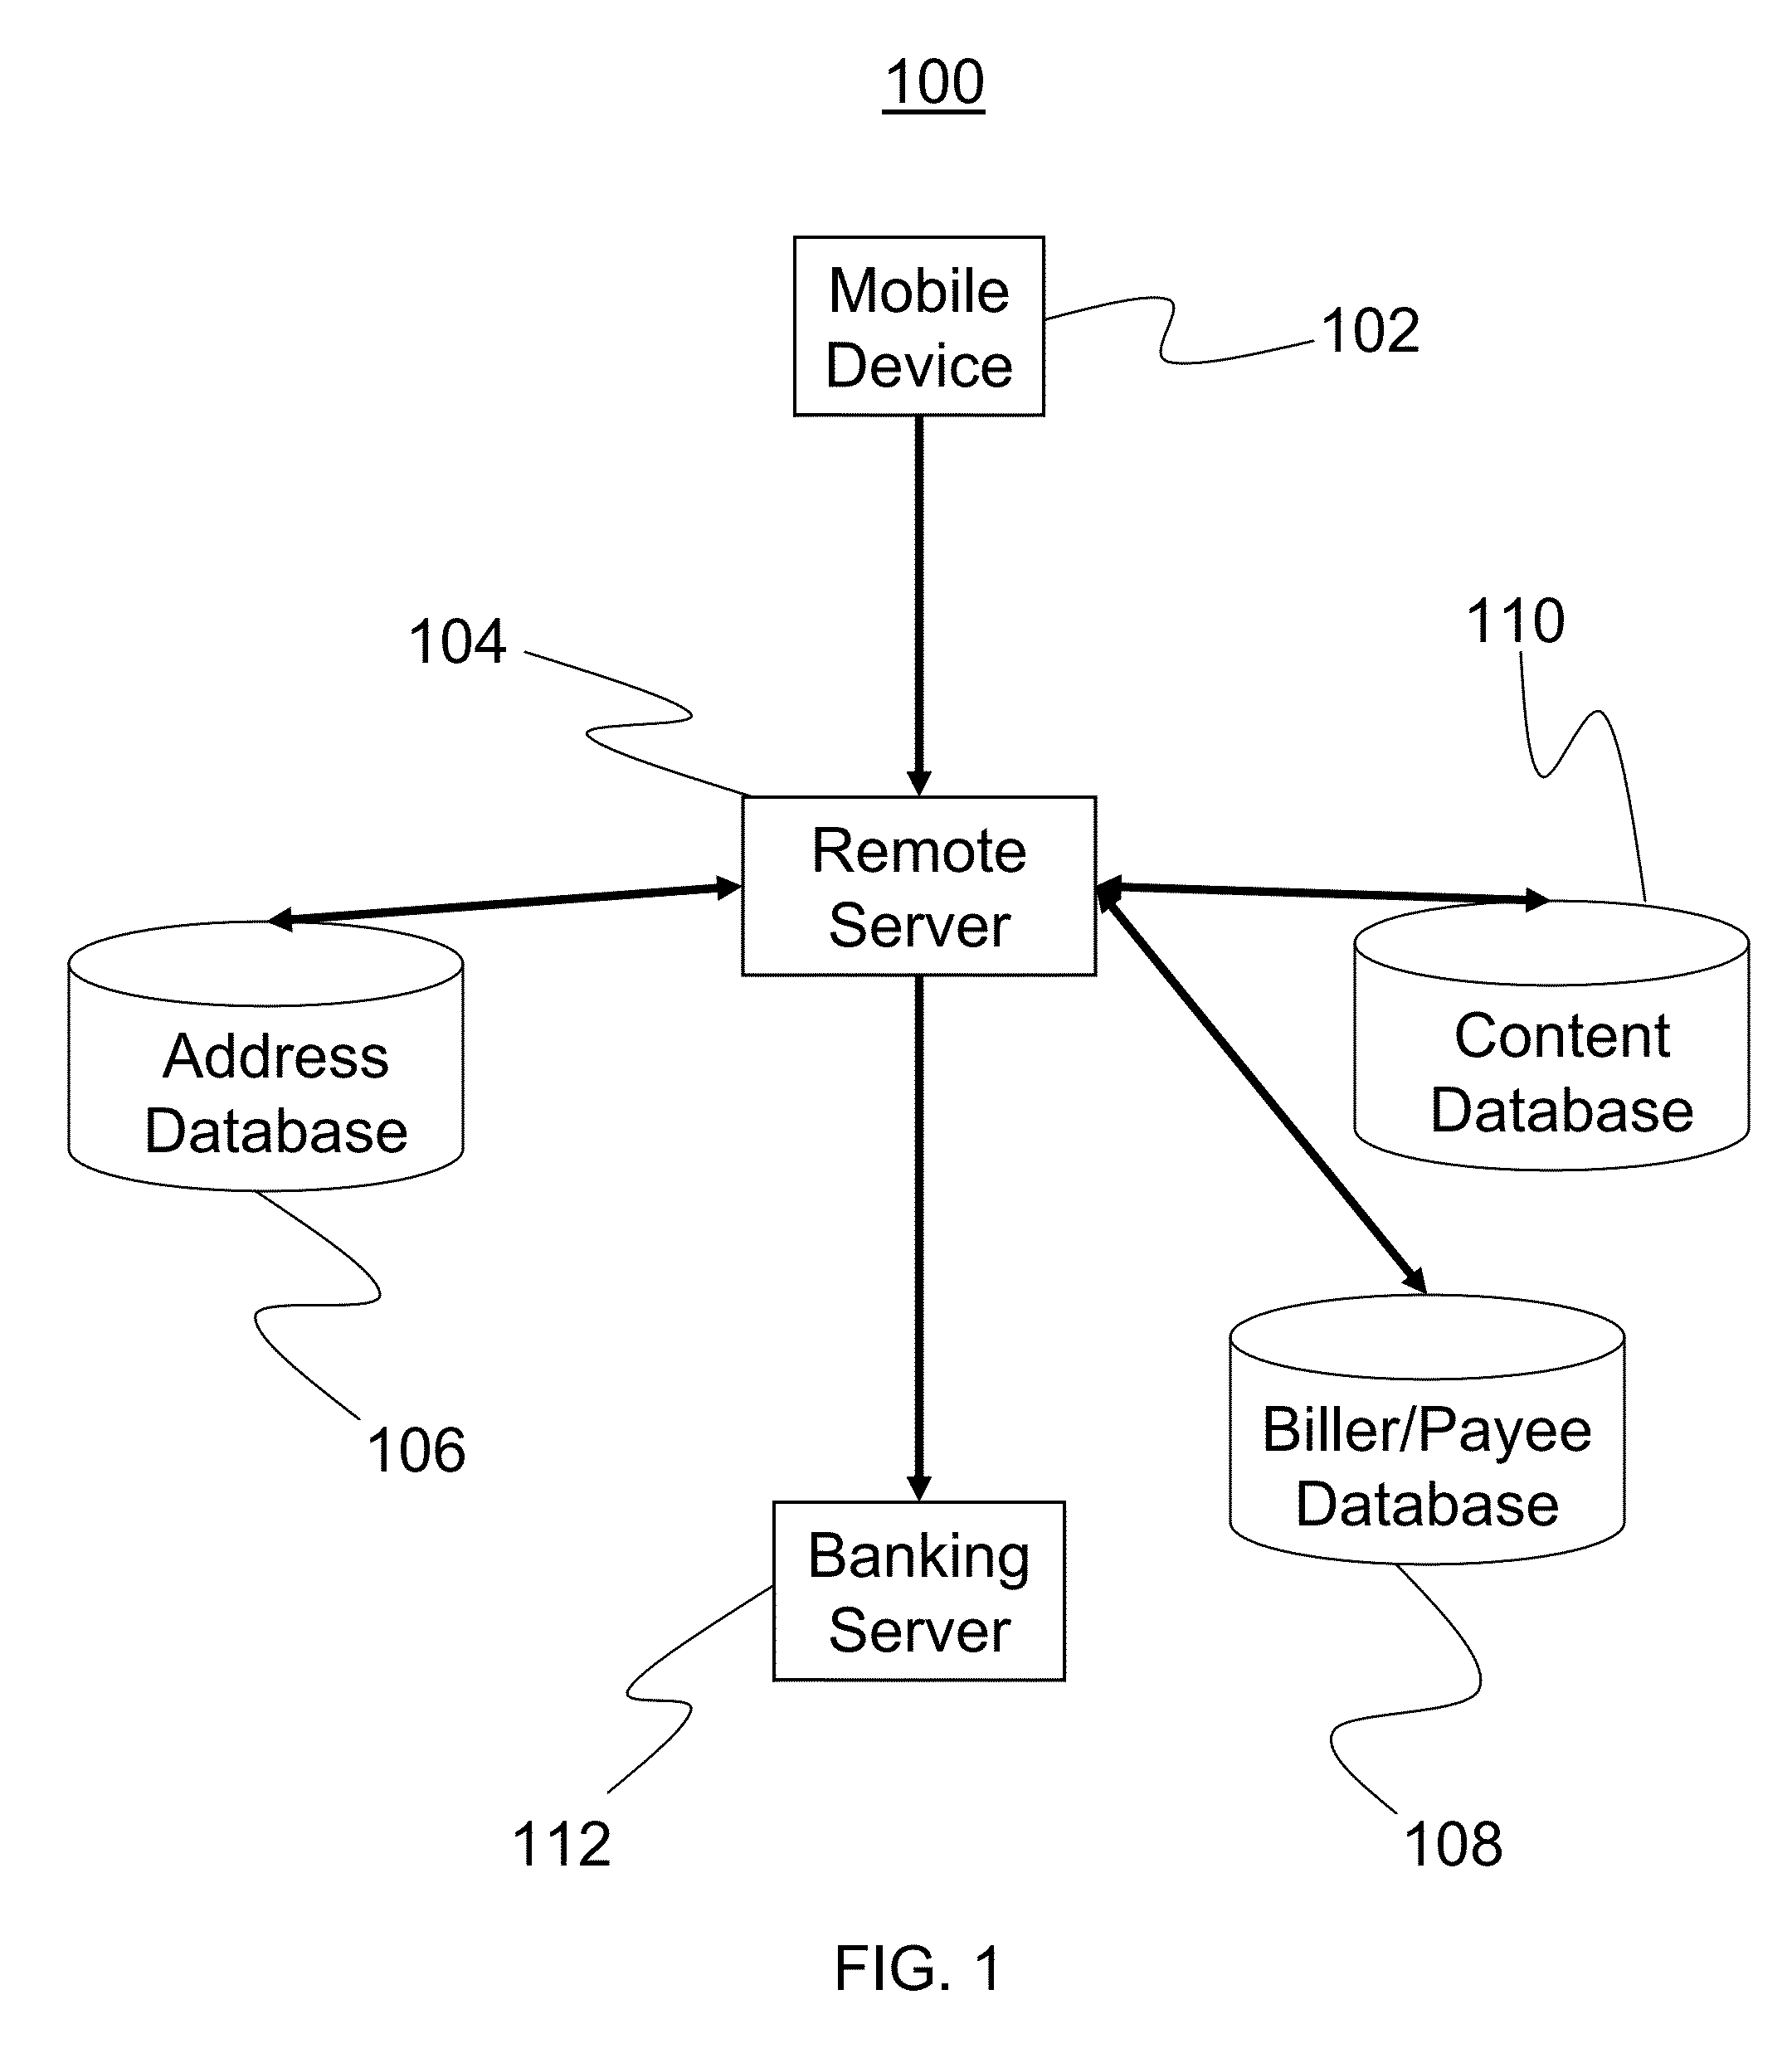 Systems and methods for mobile image capture and remittance processing